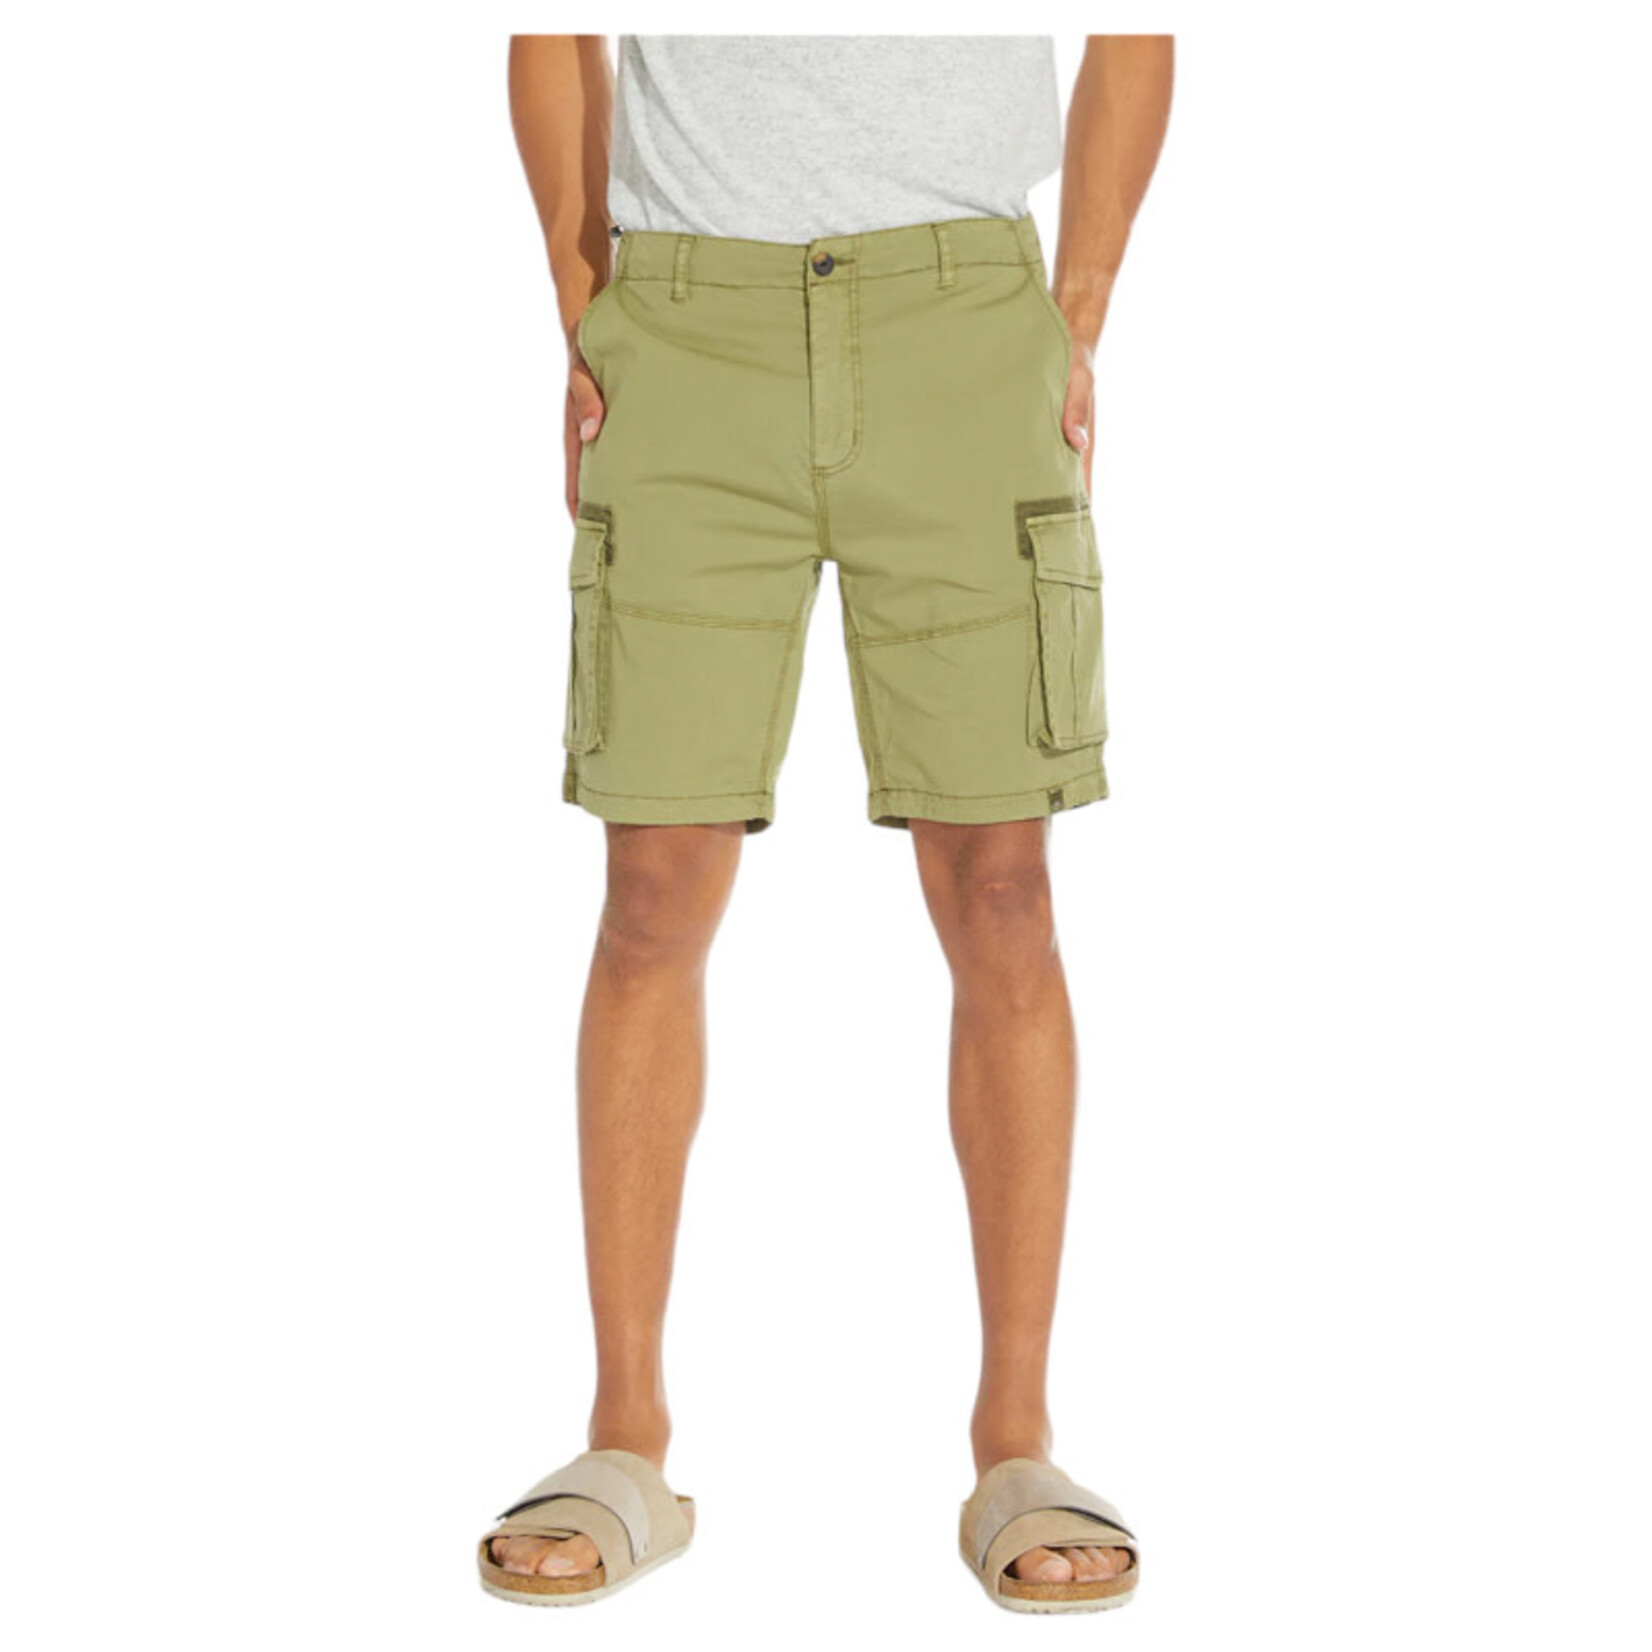 MICROS MICROS CLASSIC FIT CARGO SHORTS MZXS-6636